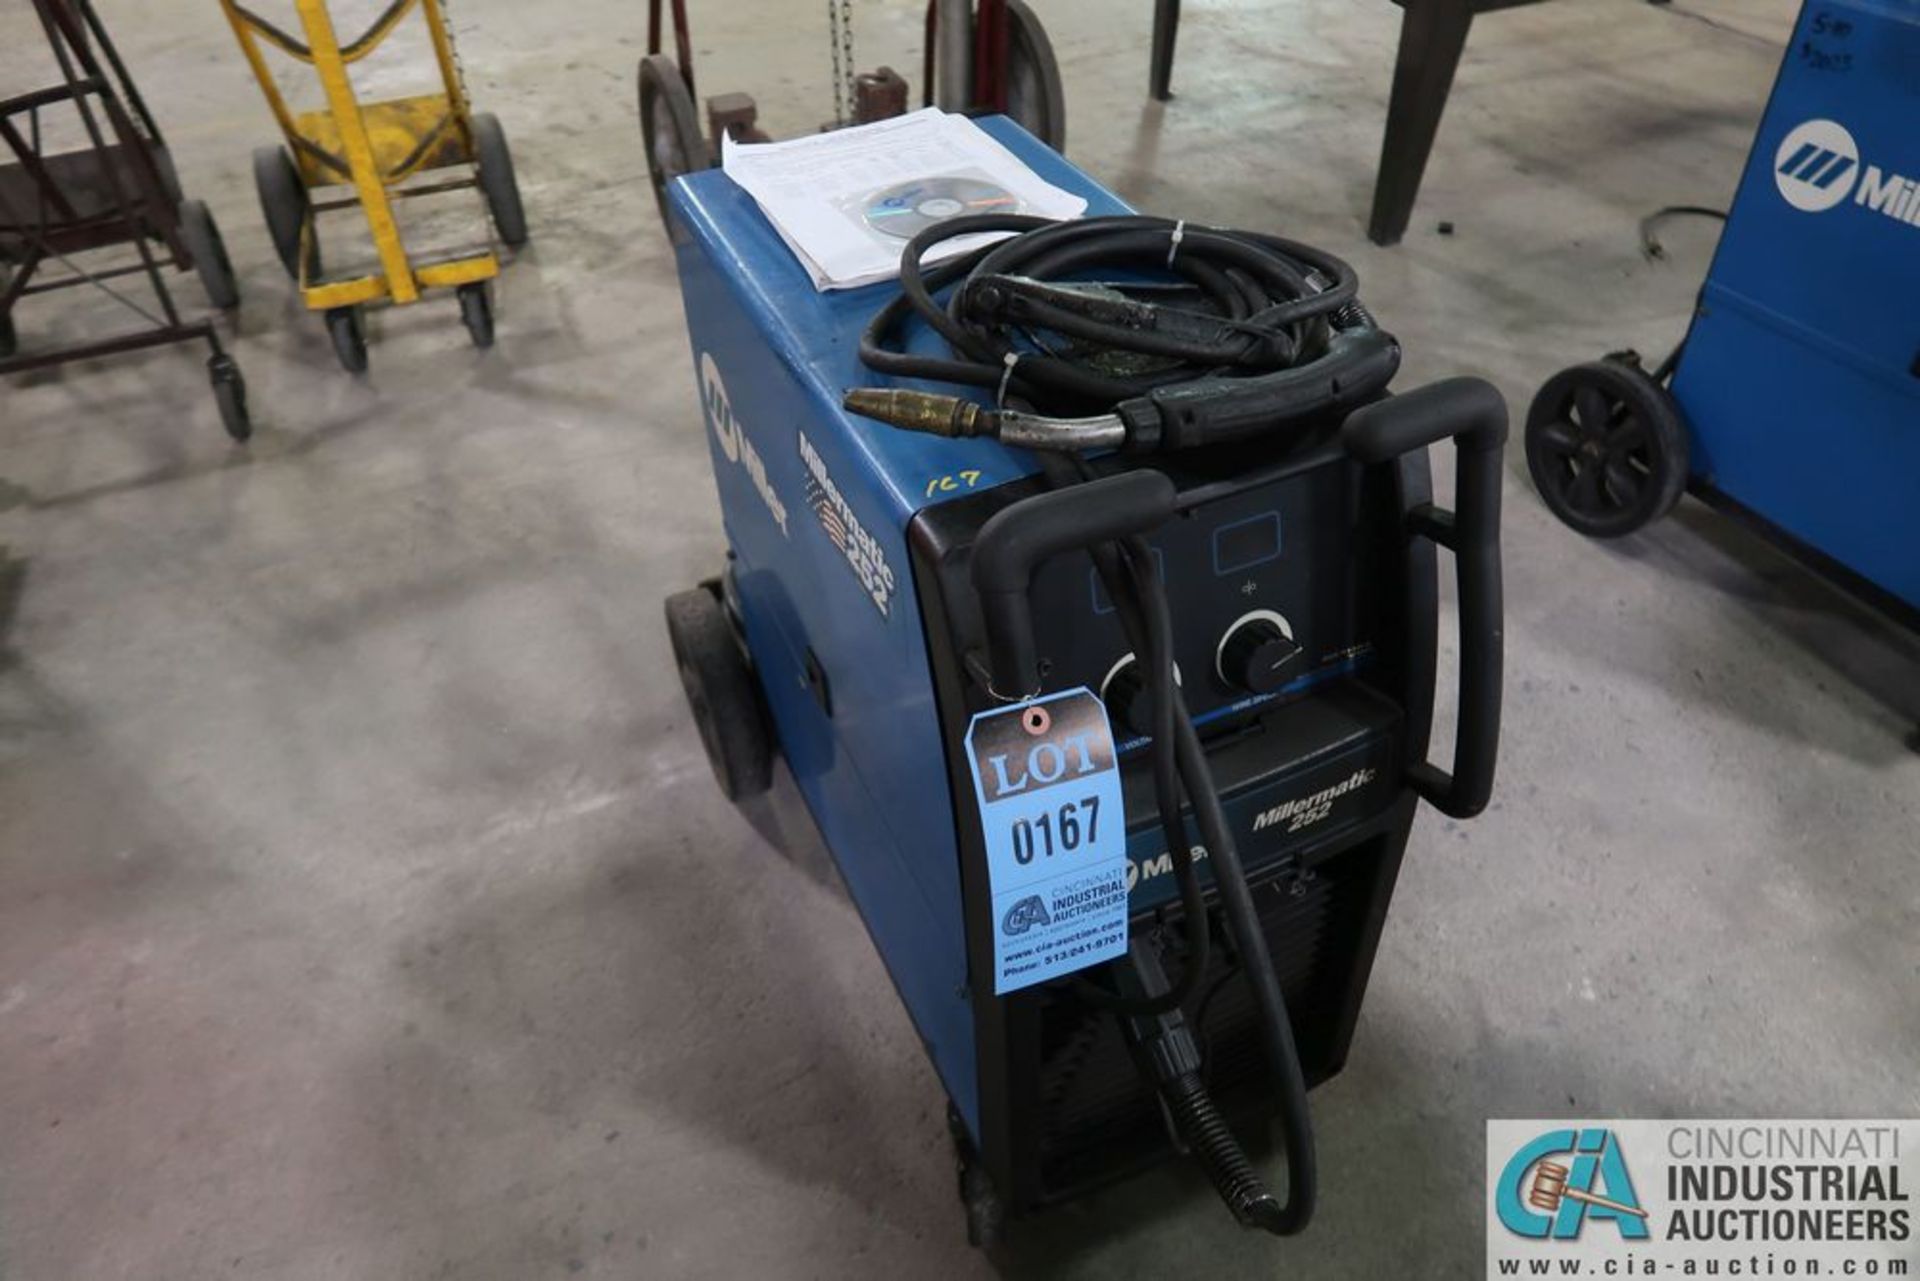 250 AMP MILLER MODEL MILLERMATIC 252 MIG WELDING POWER SOURCE; S/N MA190309N, WITH BUILT-IN WIRE